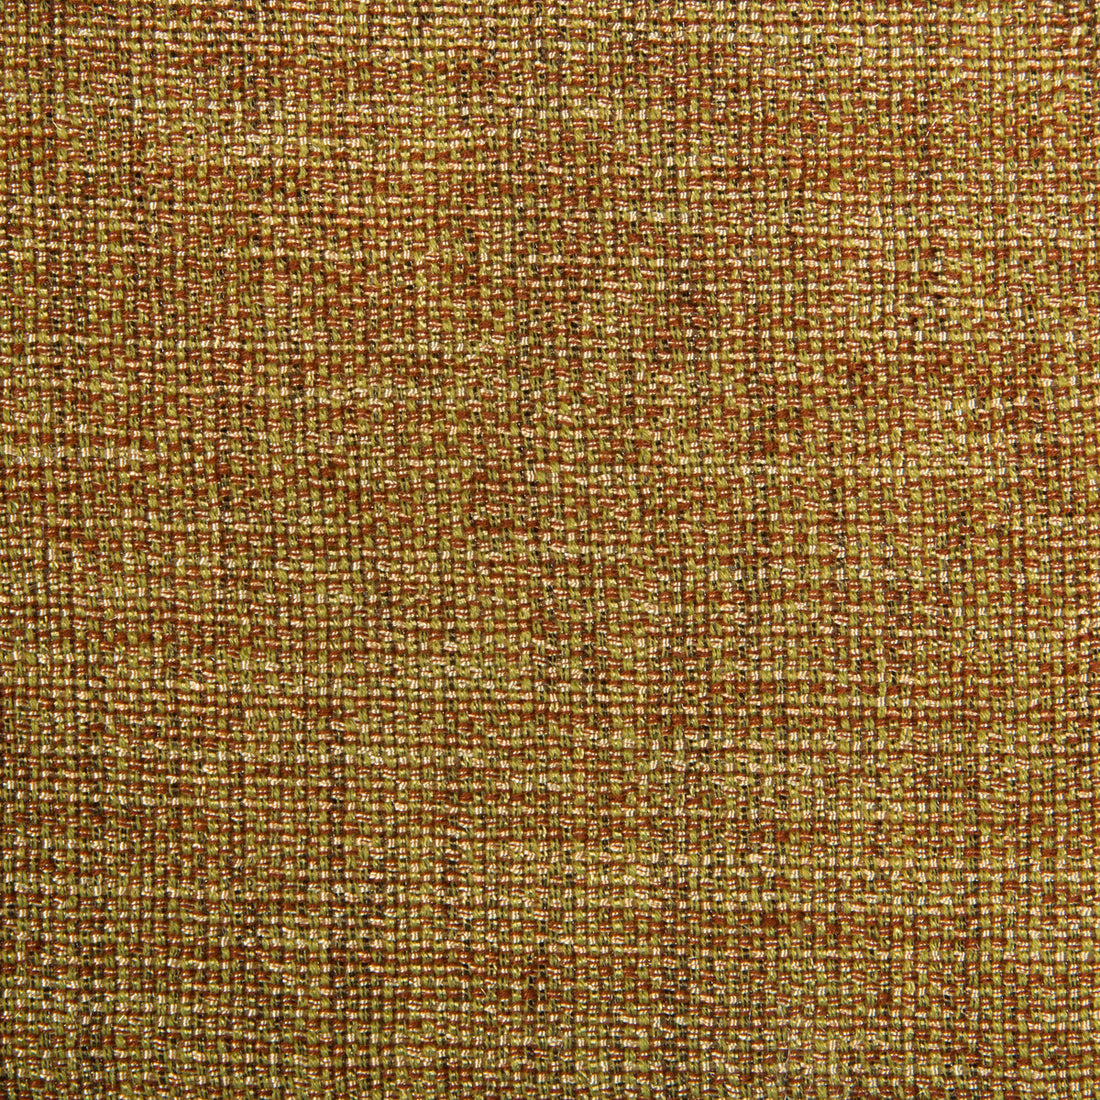 Kravet Contract fabric in 34926-324 color - pattern 34926.324.0 - by Kravet Contract